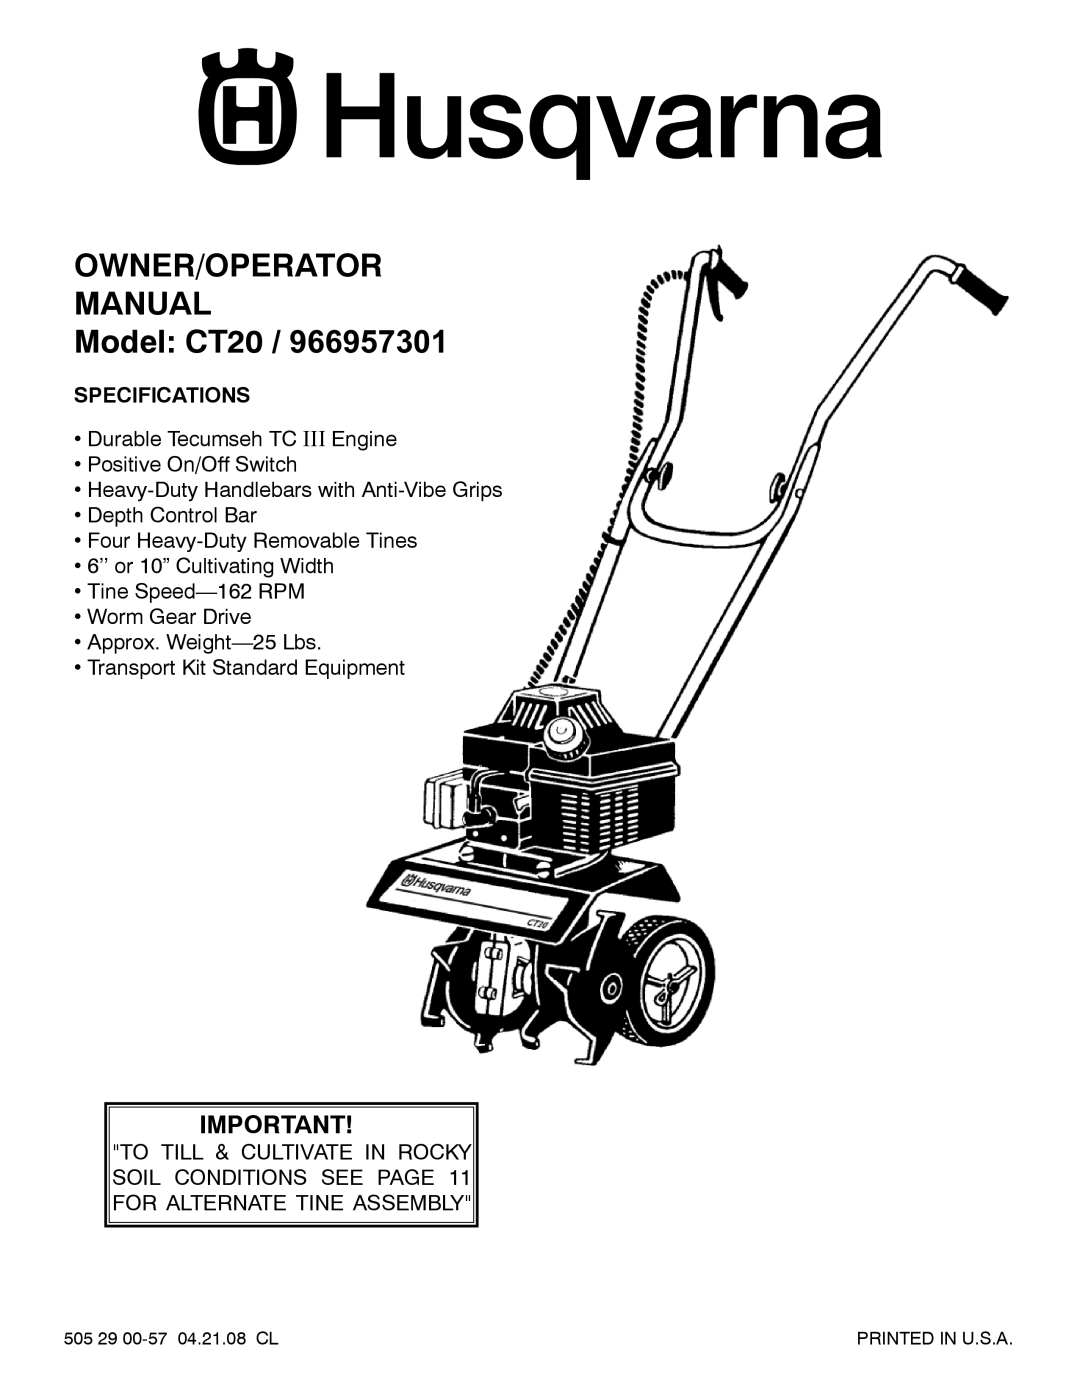 Husqvarna 966957301 specifications OWNER/OPERATOR MANUAL Model CT20, Specifications 